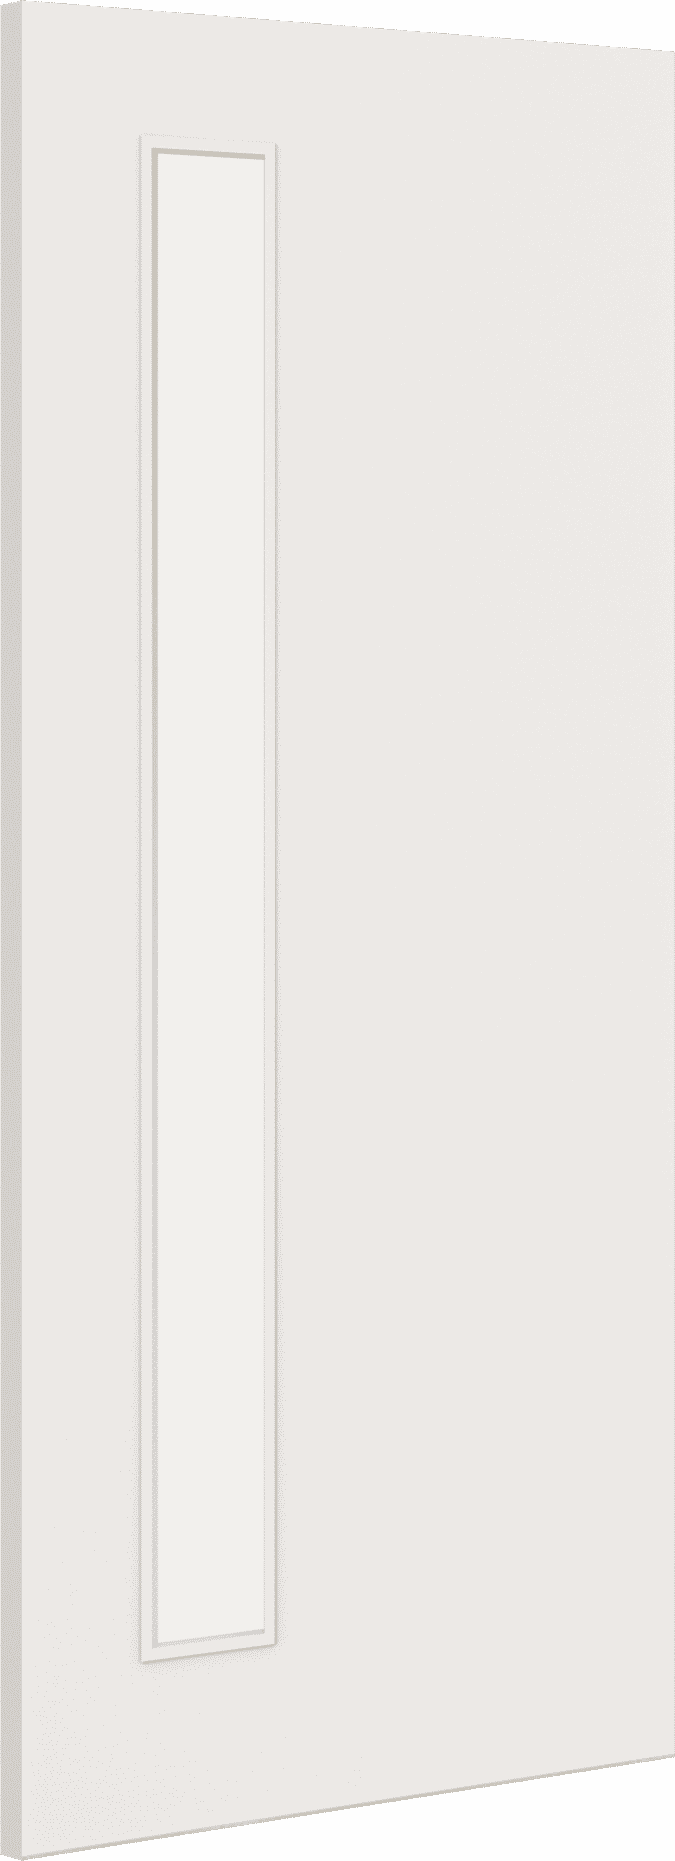 1981mm x 914mm x 44mm (36") Architectural Paint Grade White 06 Frosted Glazed Fire Door Blank